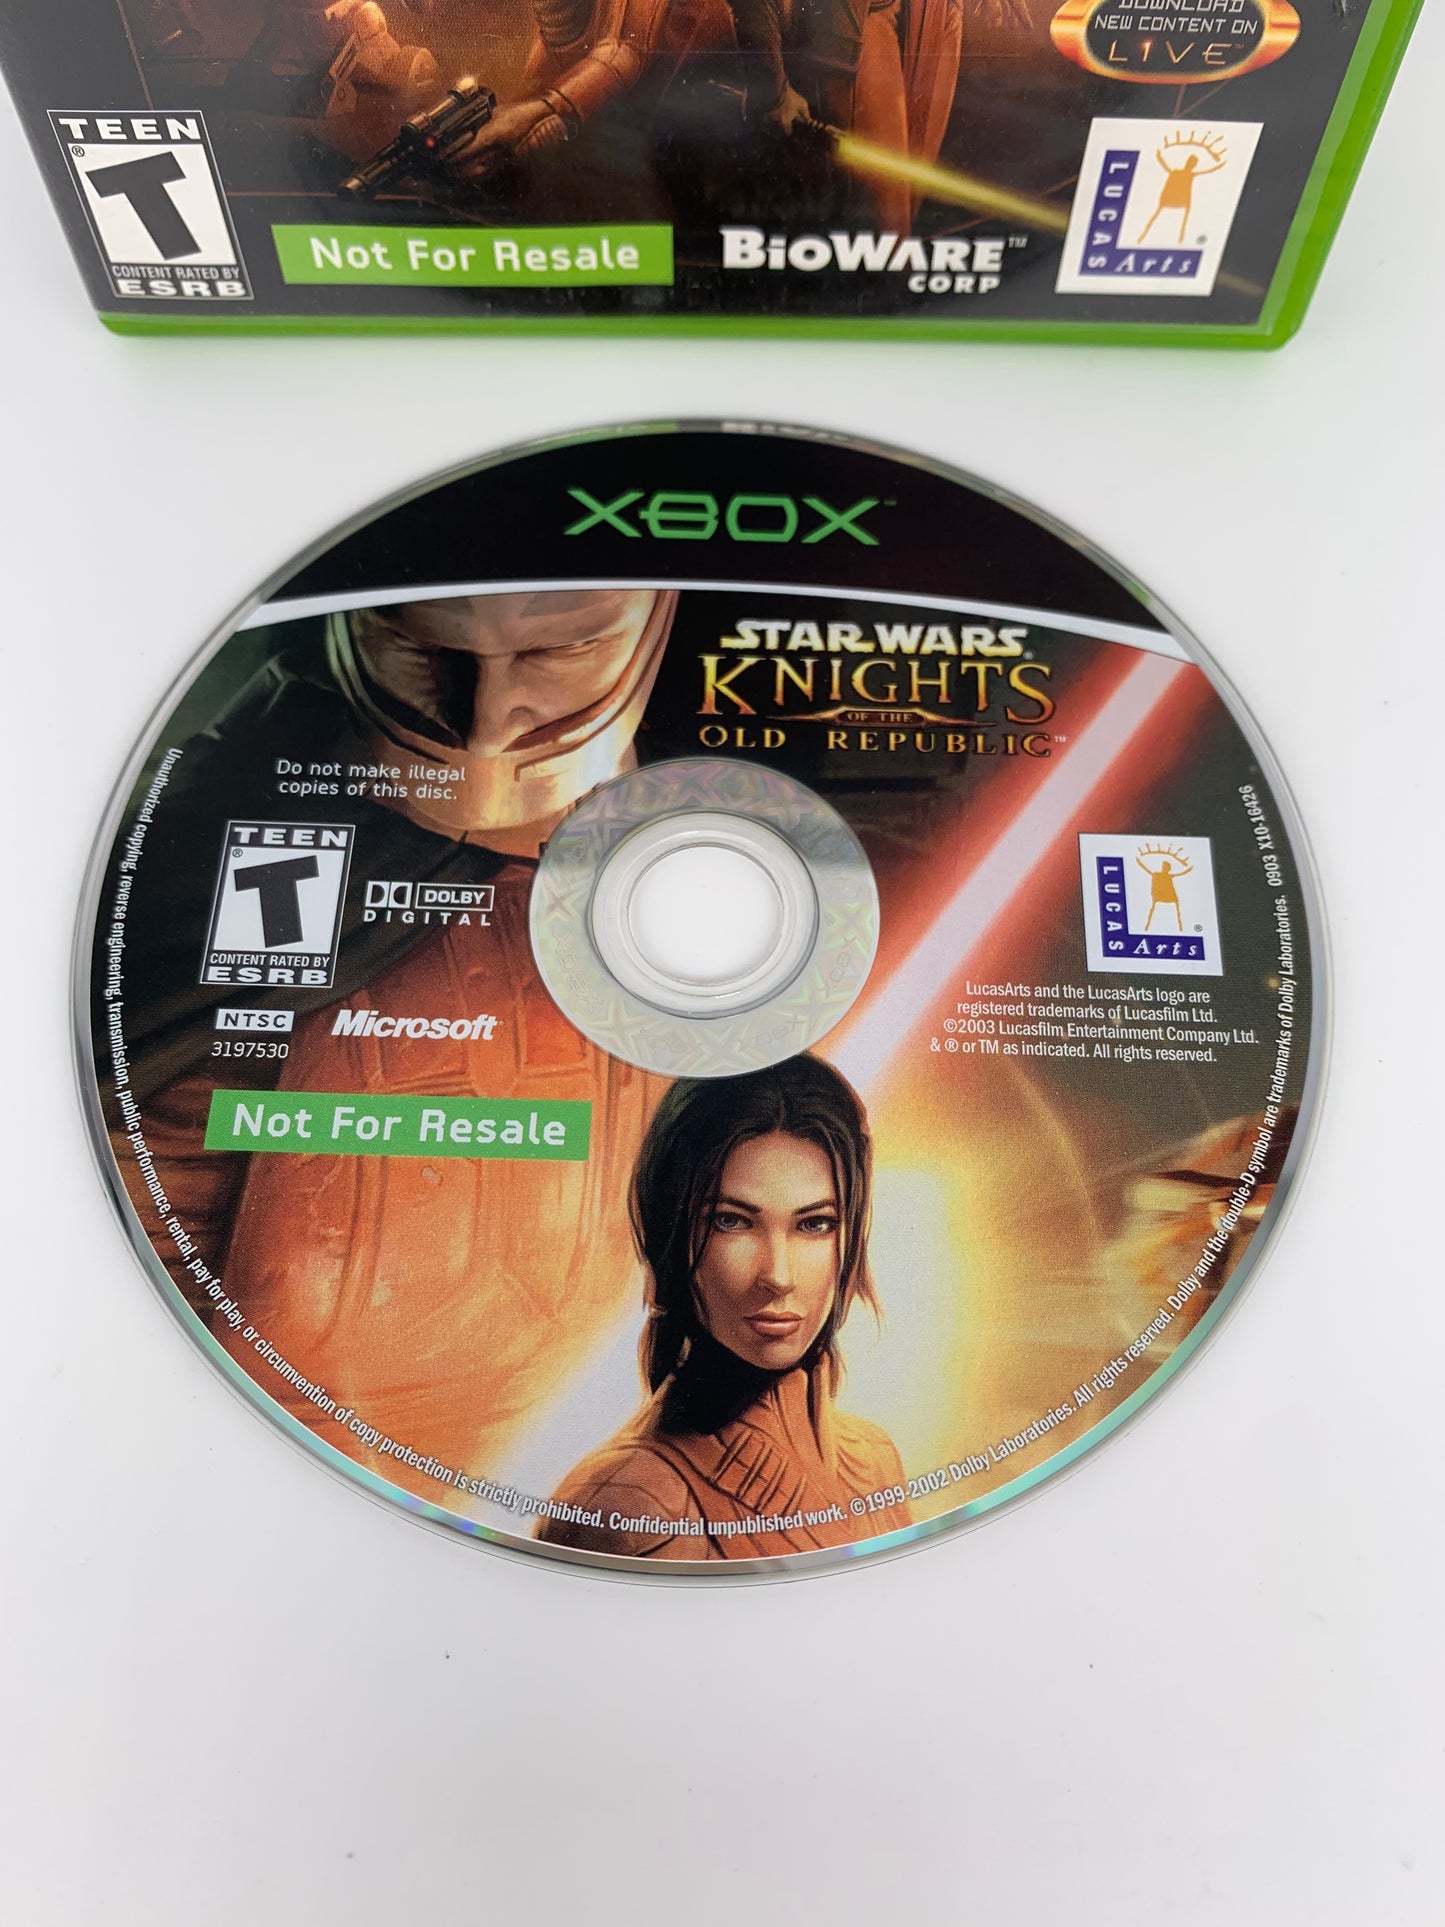 MiCROSOFT XBOX ORiGiNAL | STAR WARS KNiGHTS OF THE OLD REPUBLiC | NOT FOR RESALE